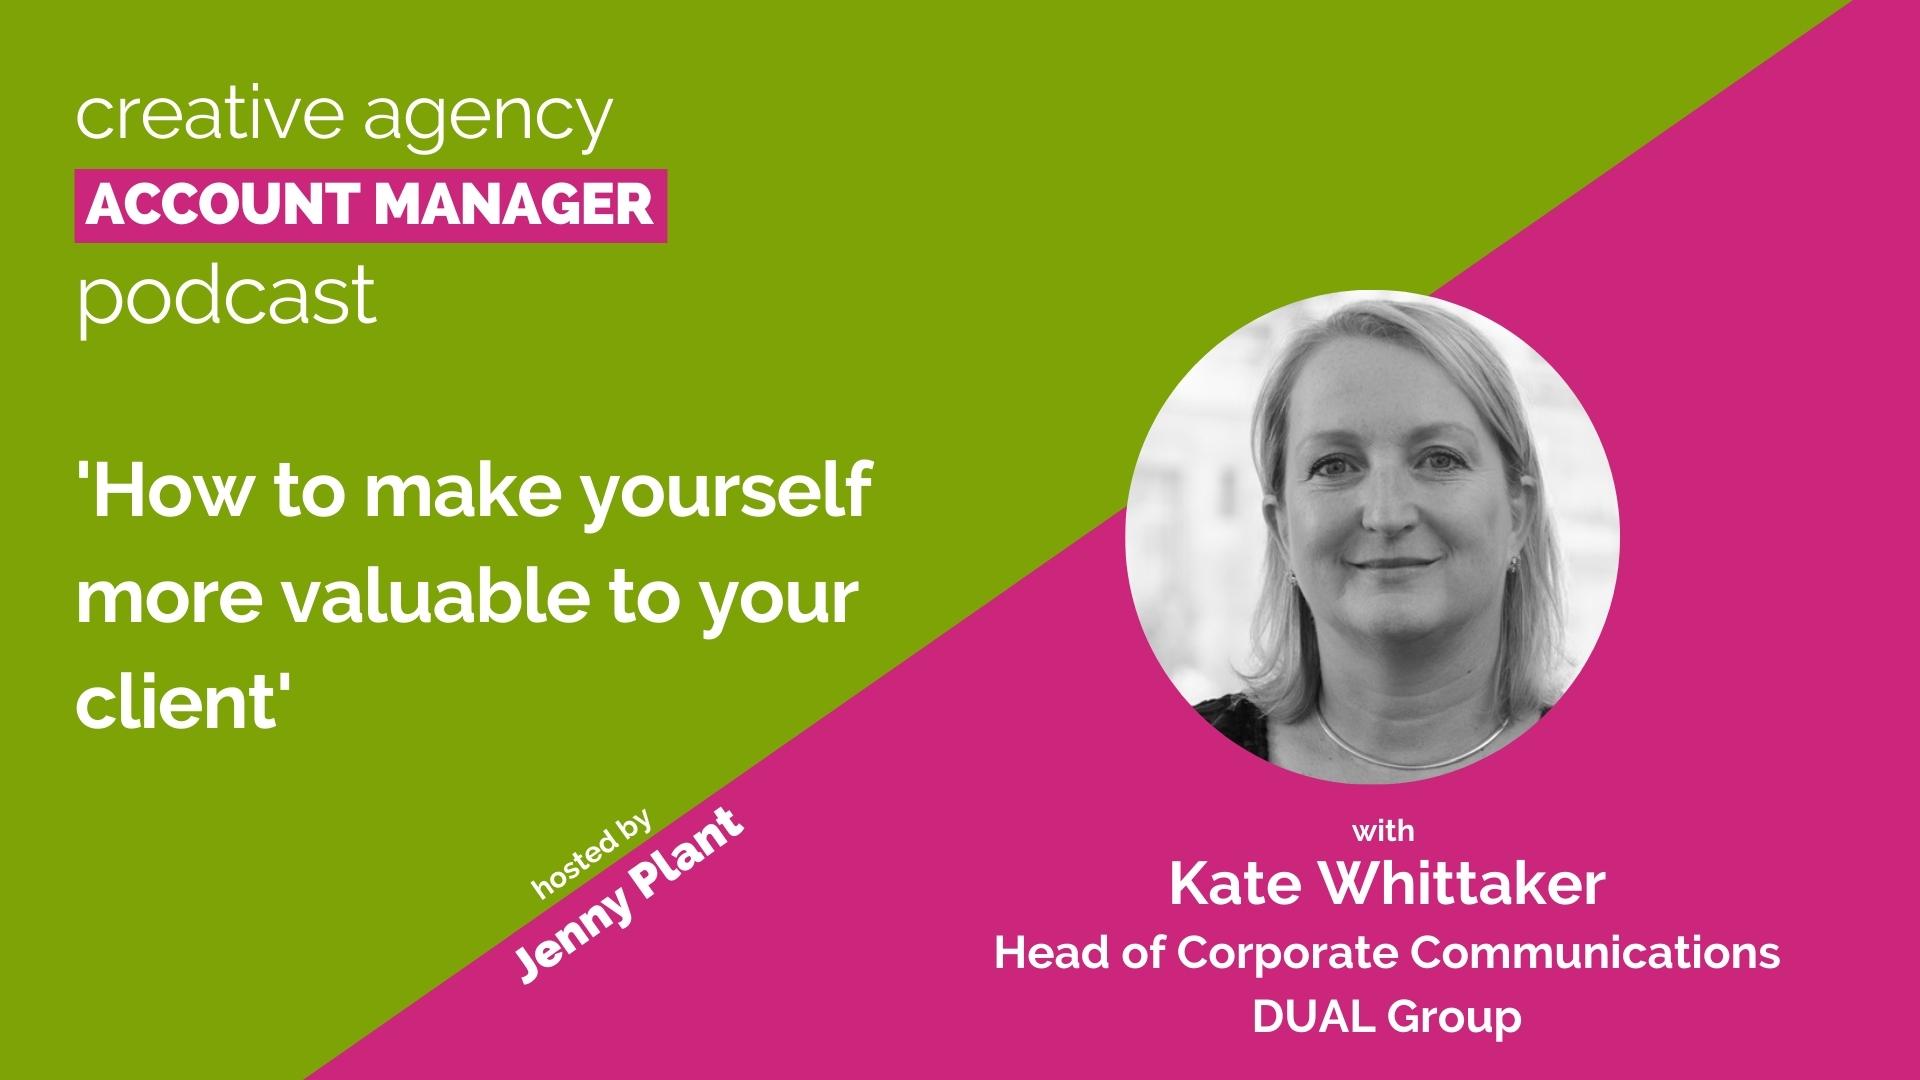 How to make yourself more valuable to your client, with Kate Whittaker